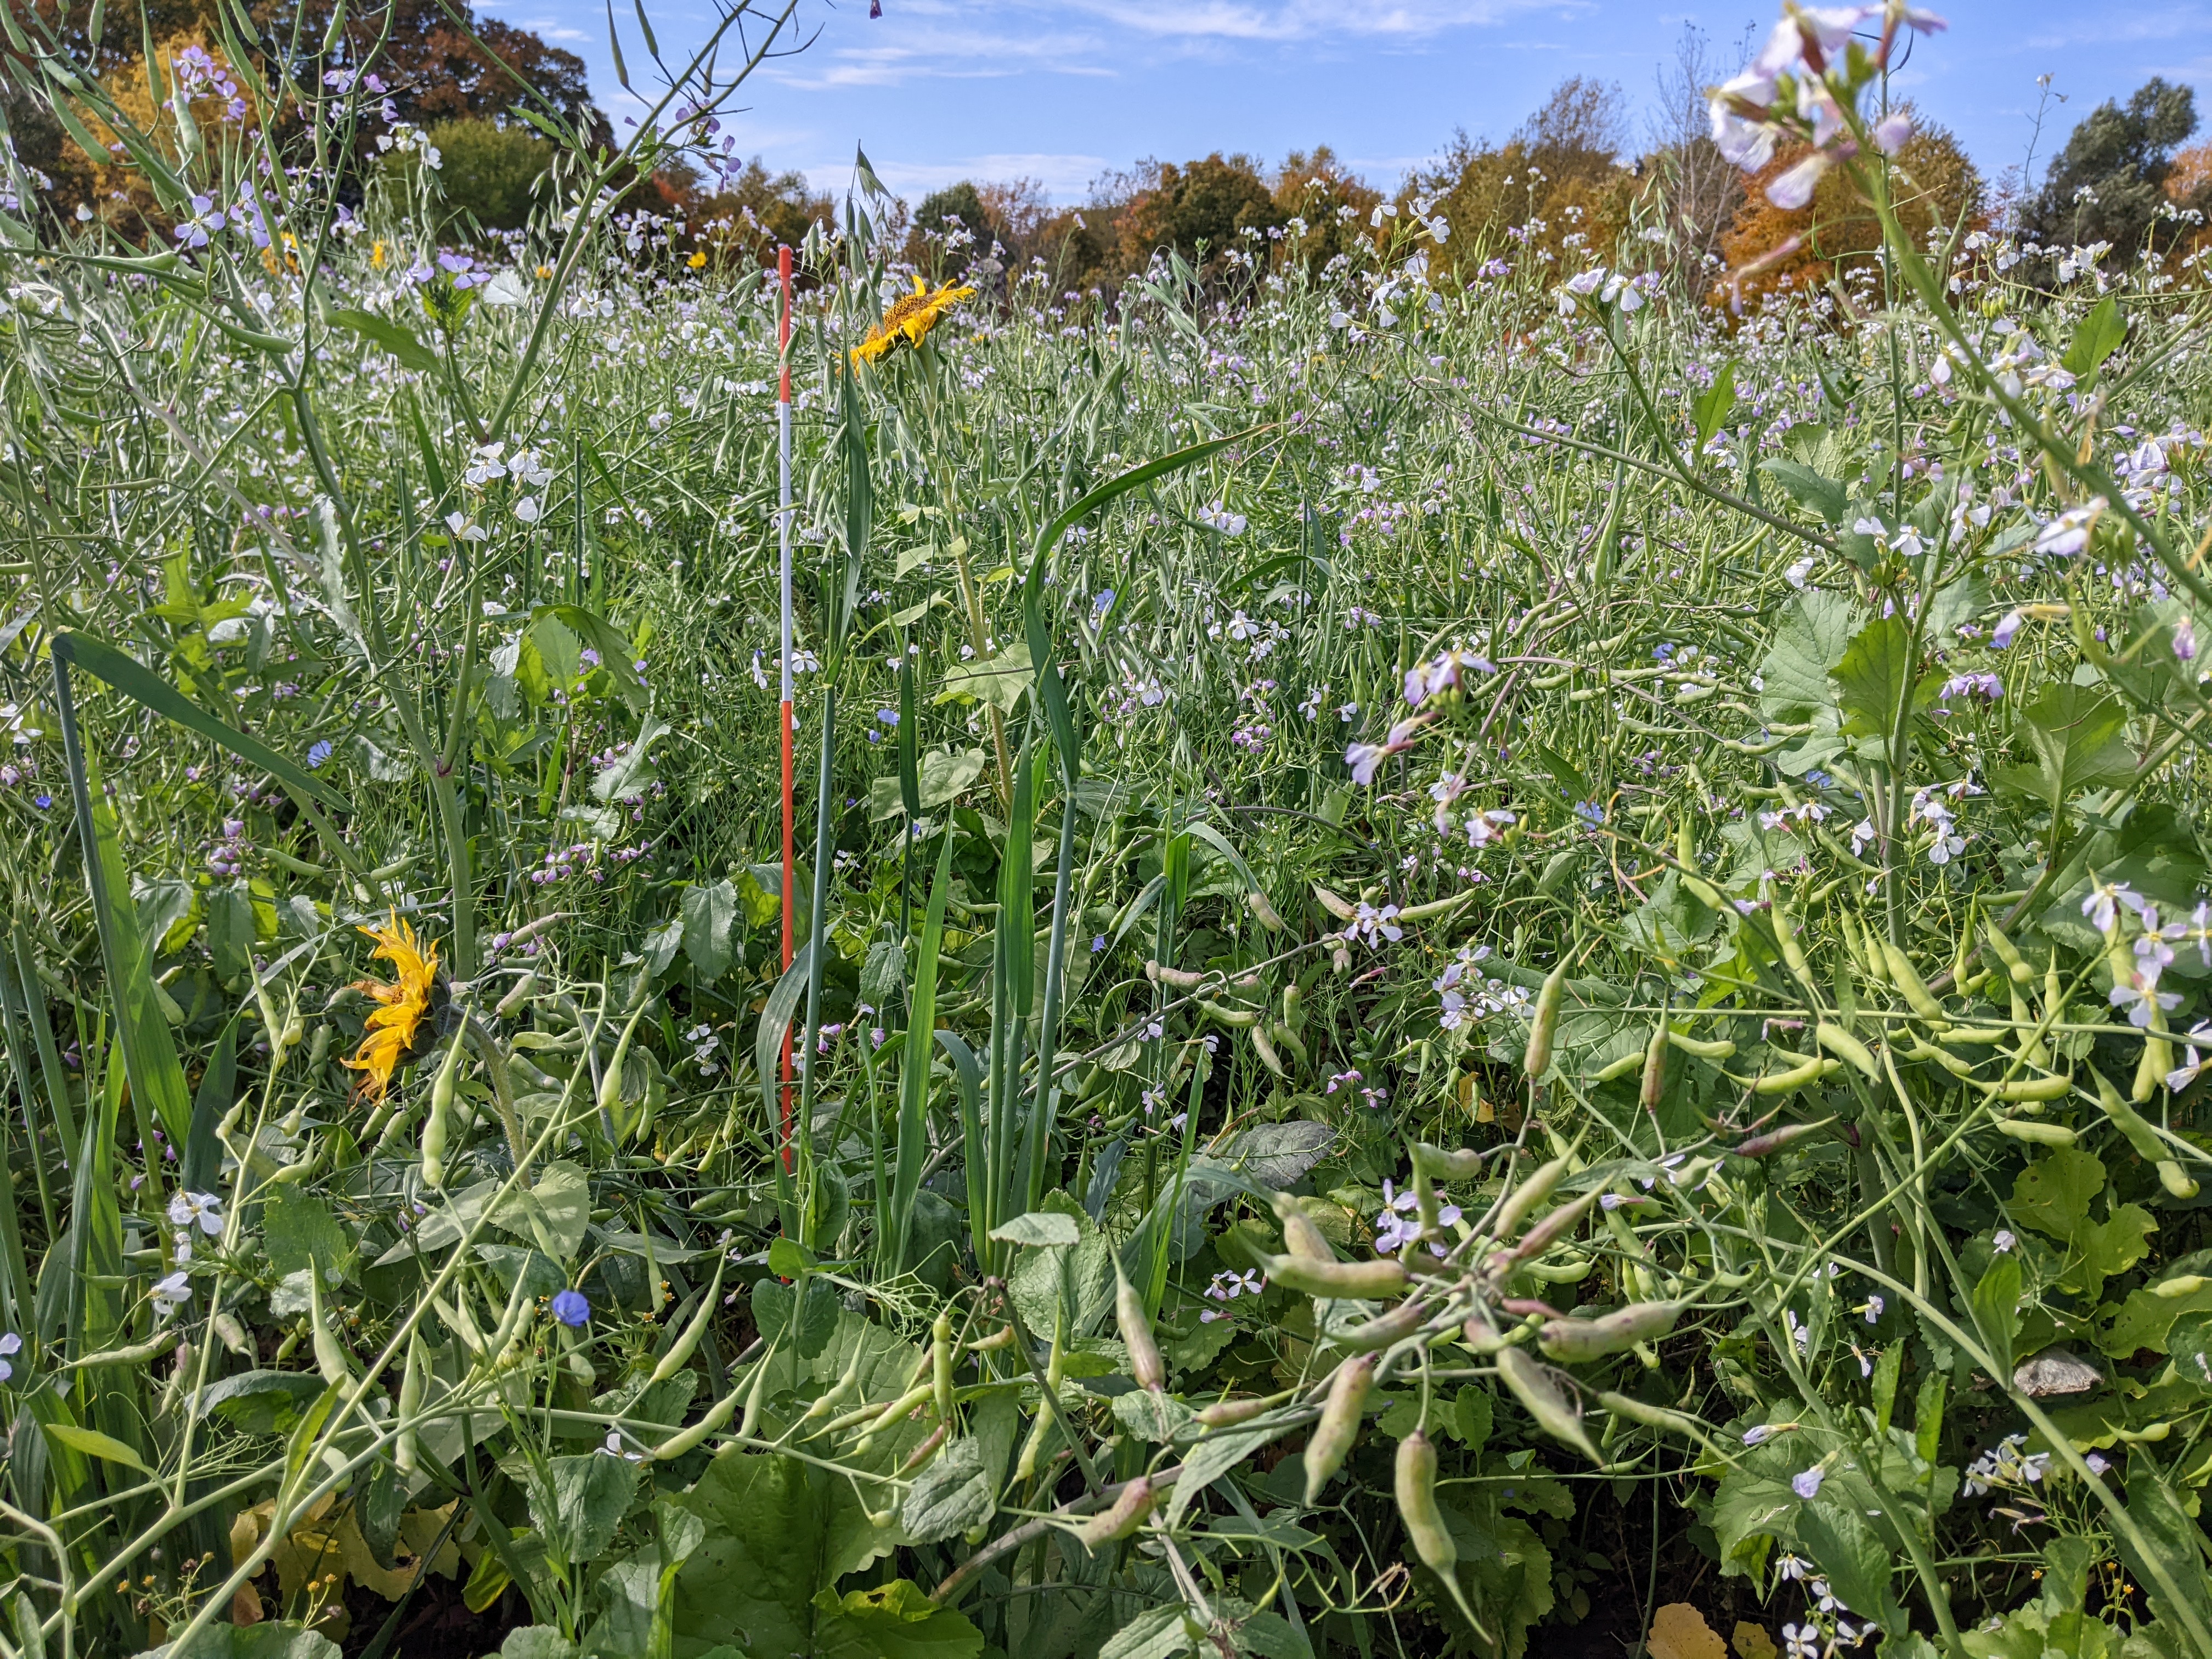 A diverse mix of plants growing in a field.